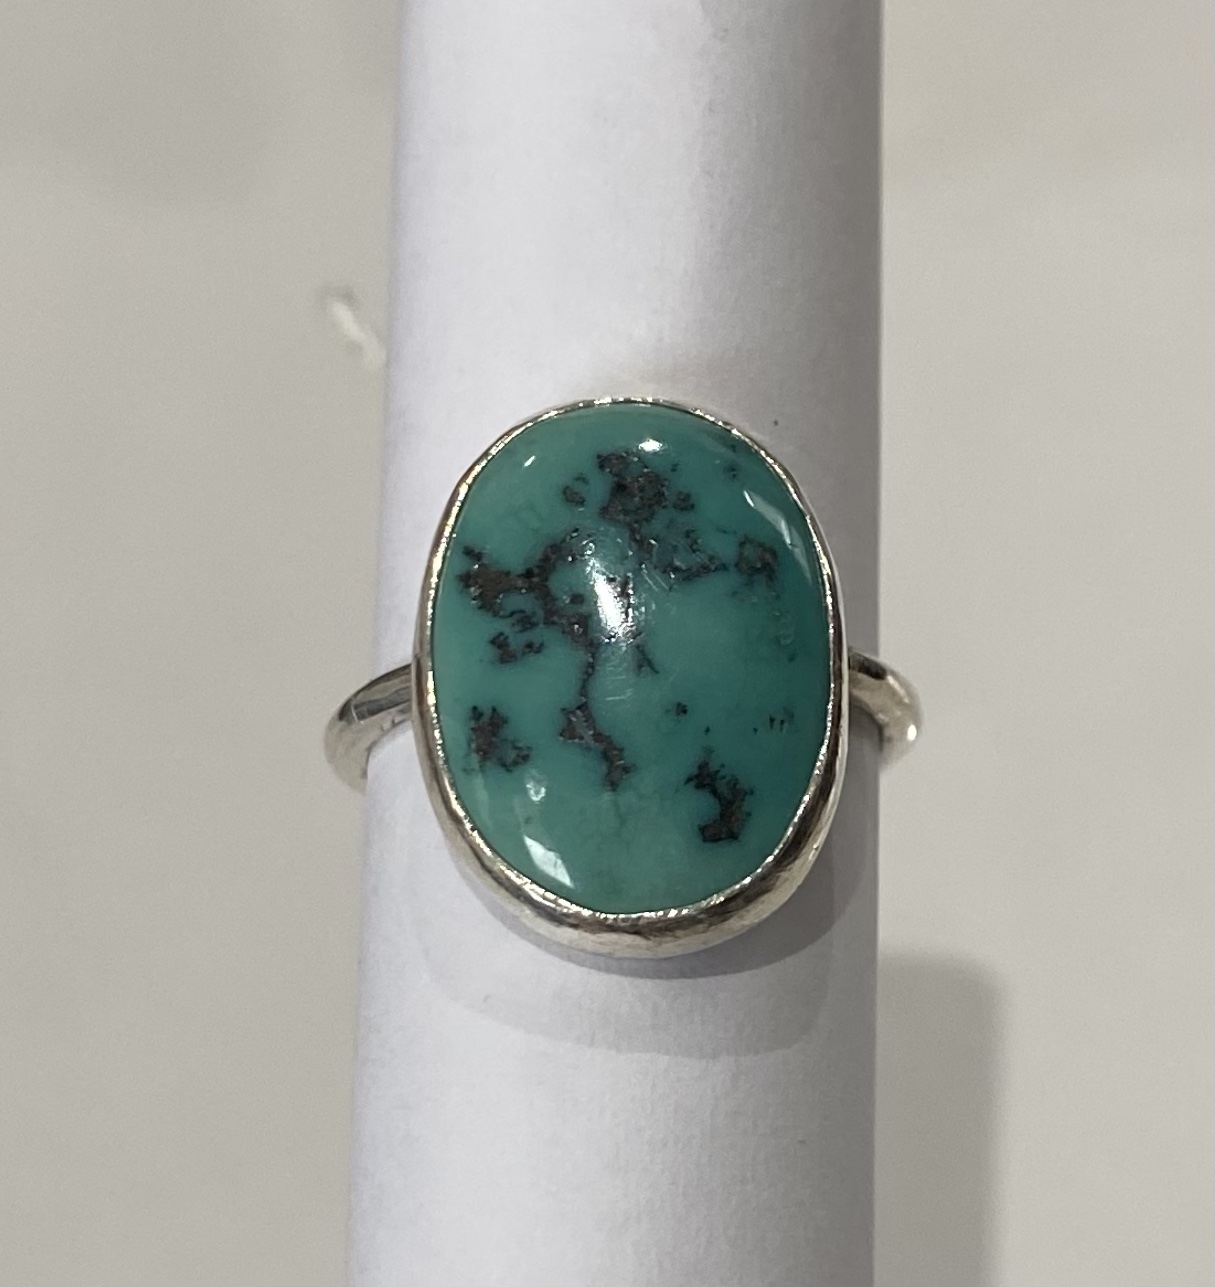 Oval Turquoise Ring EM124
Sterling Silver
Size 6.5
$6 0